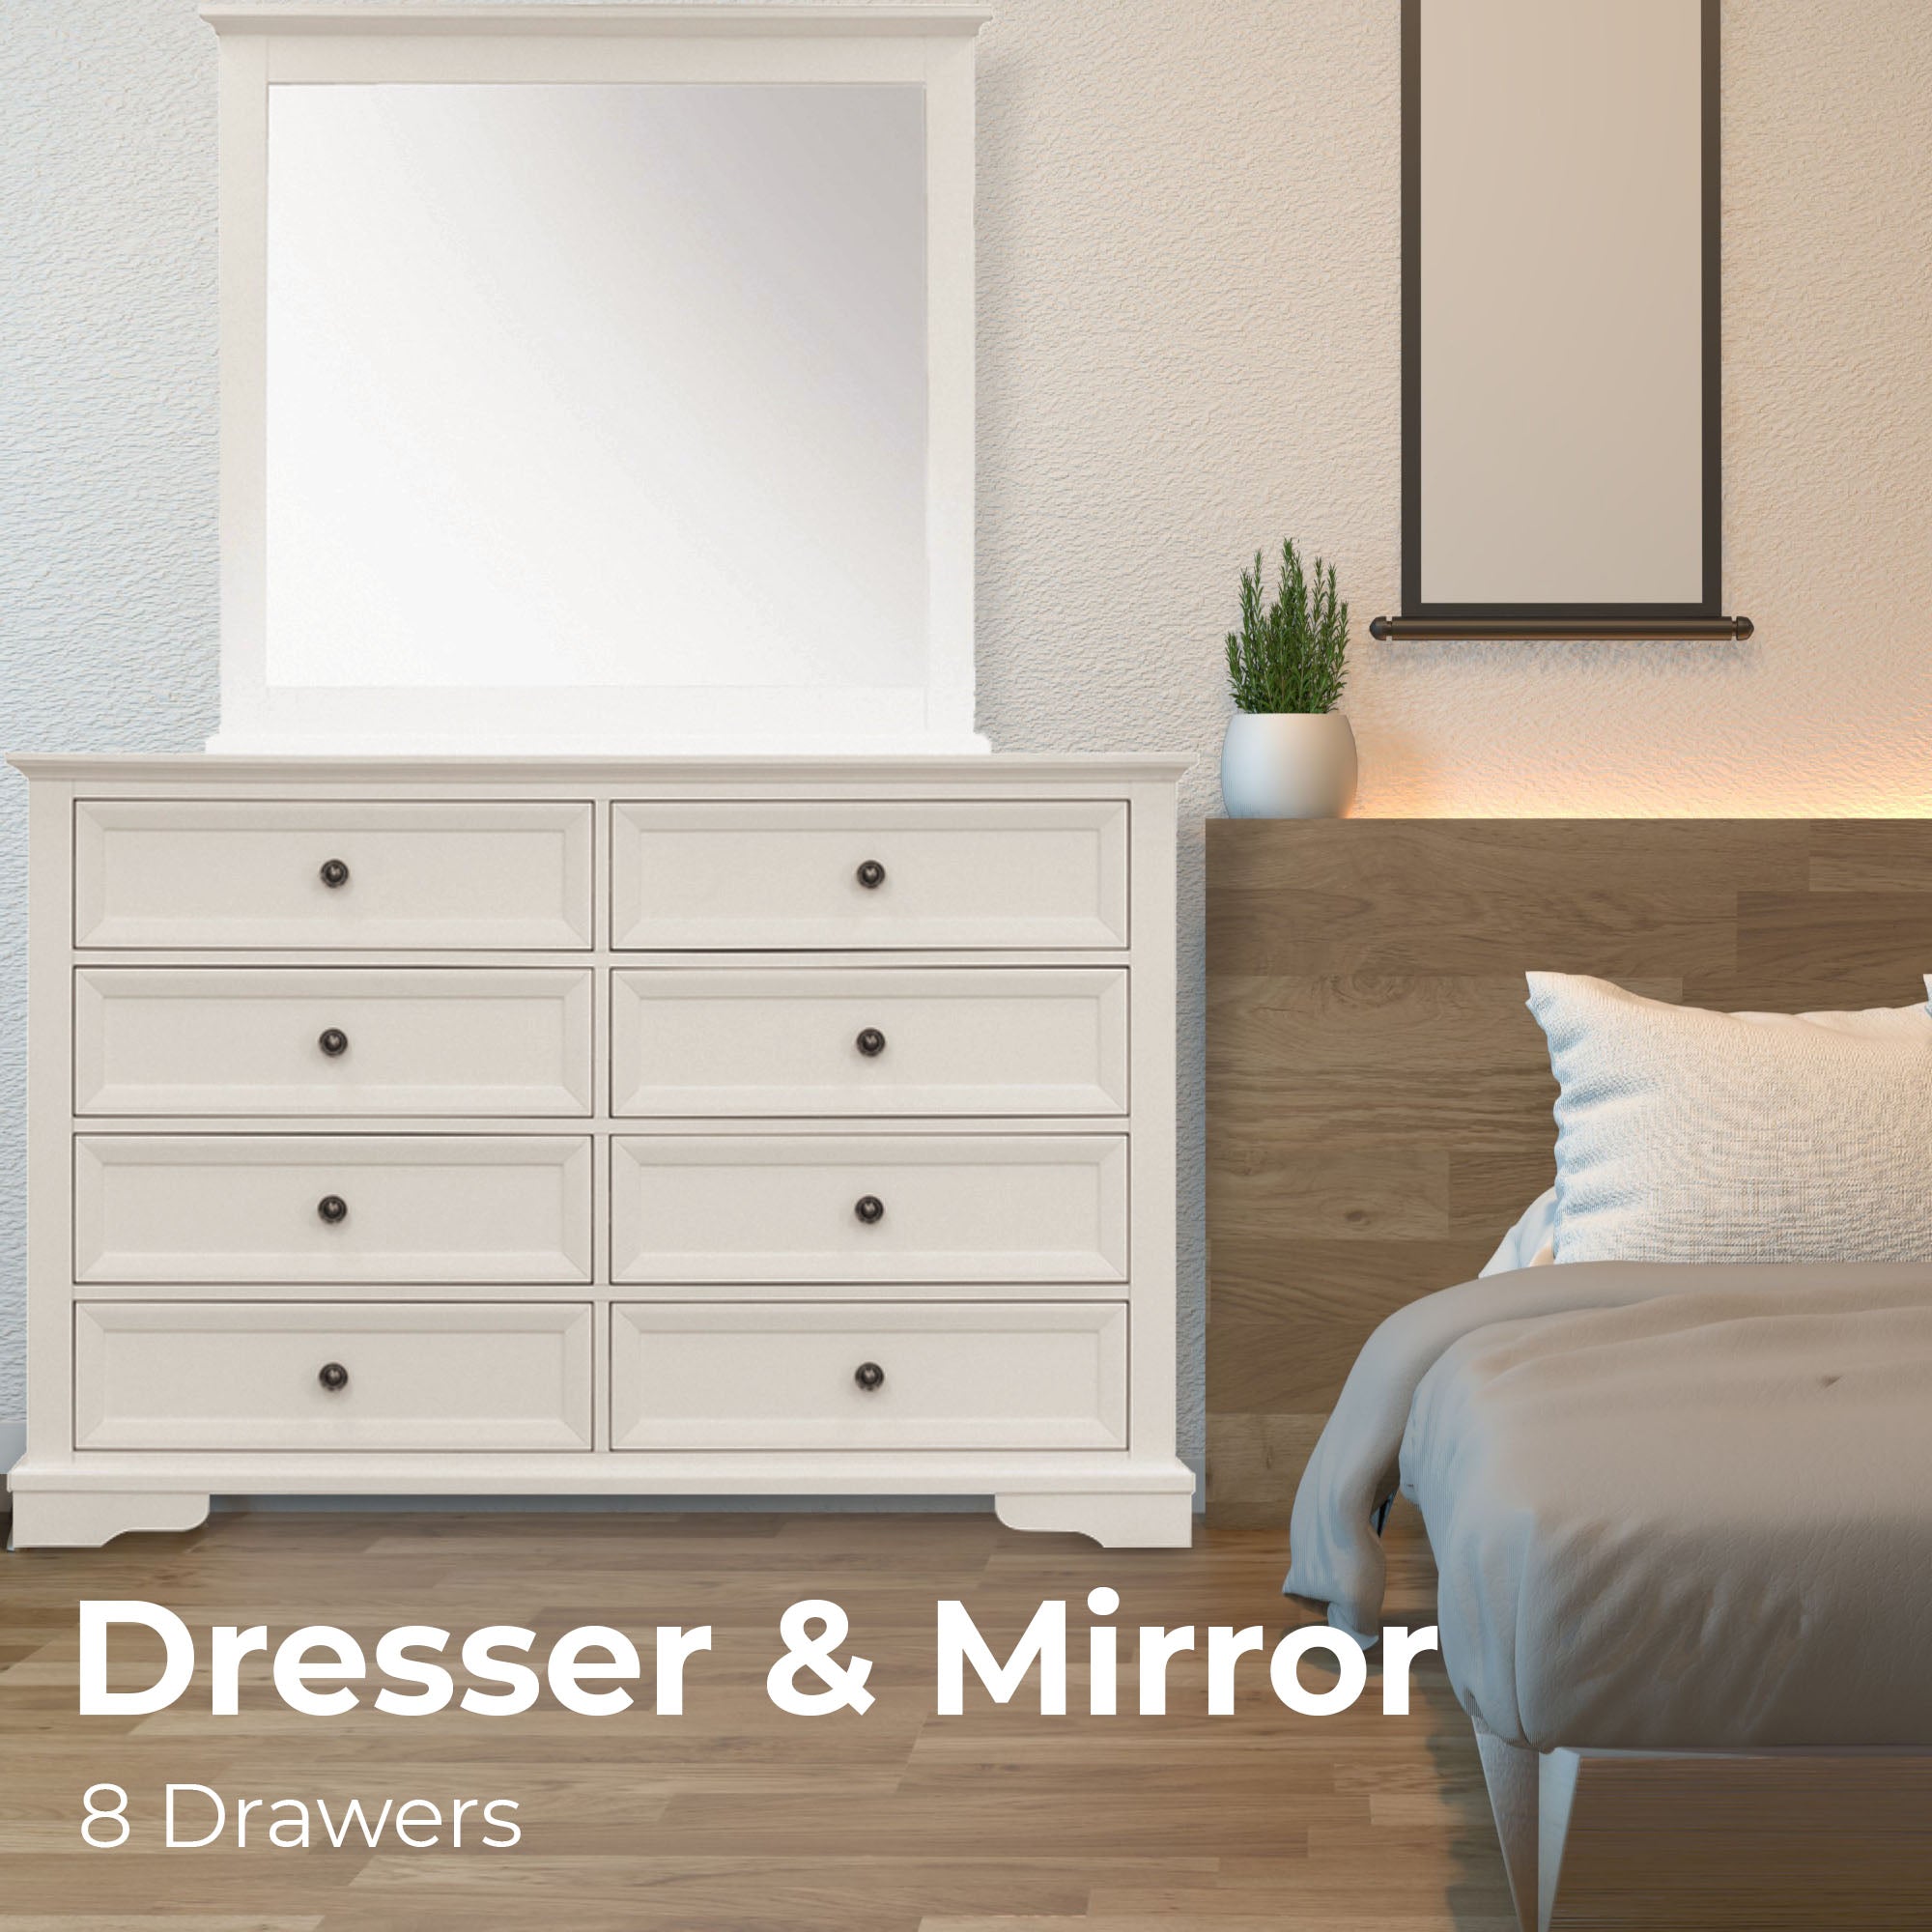 Fully Assembled! Celosia Dresser Mirror 8 Chest of Drawers Bedroom Timber Storage Cabinet - White